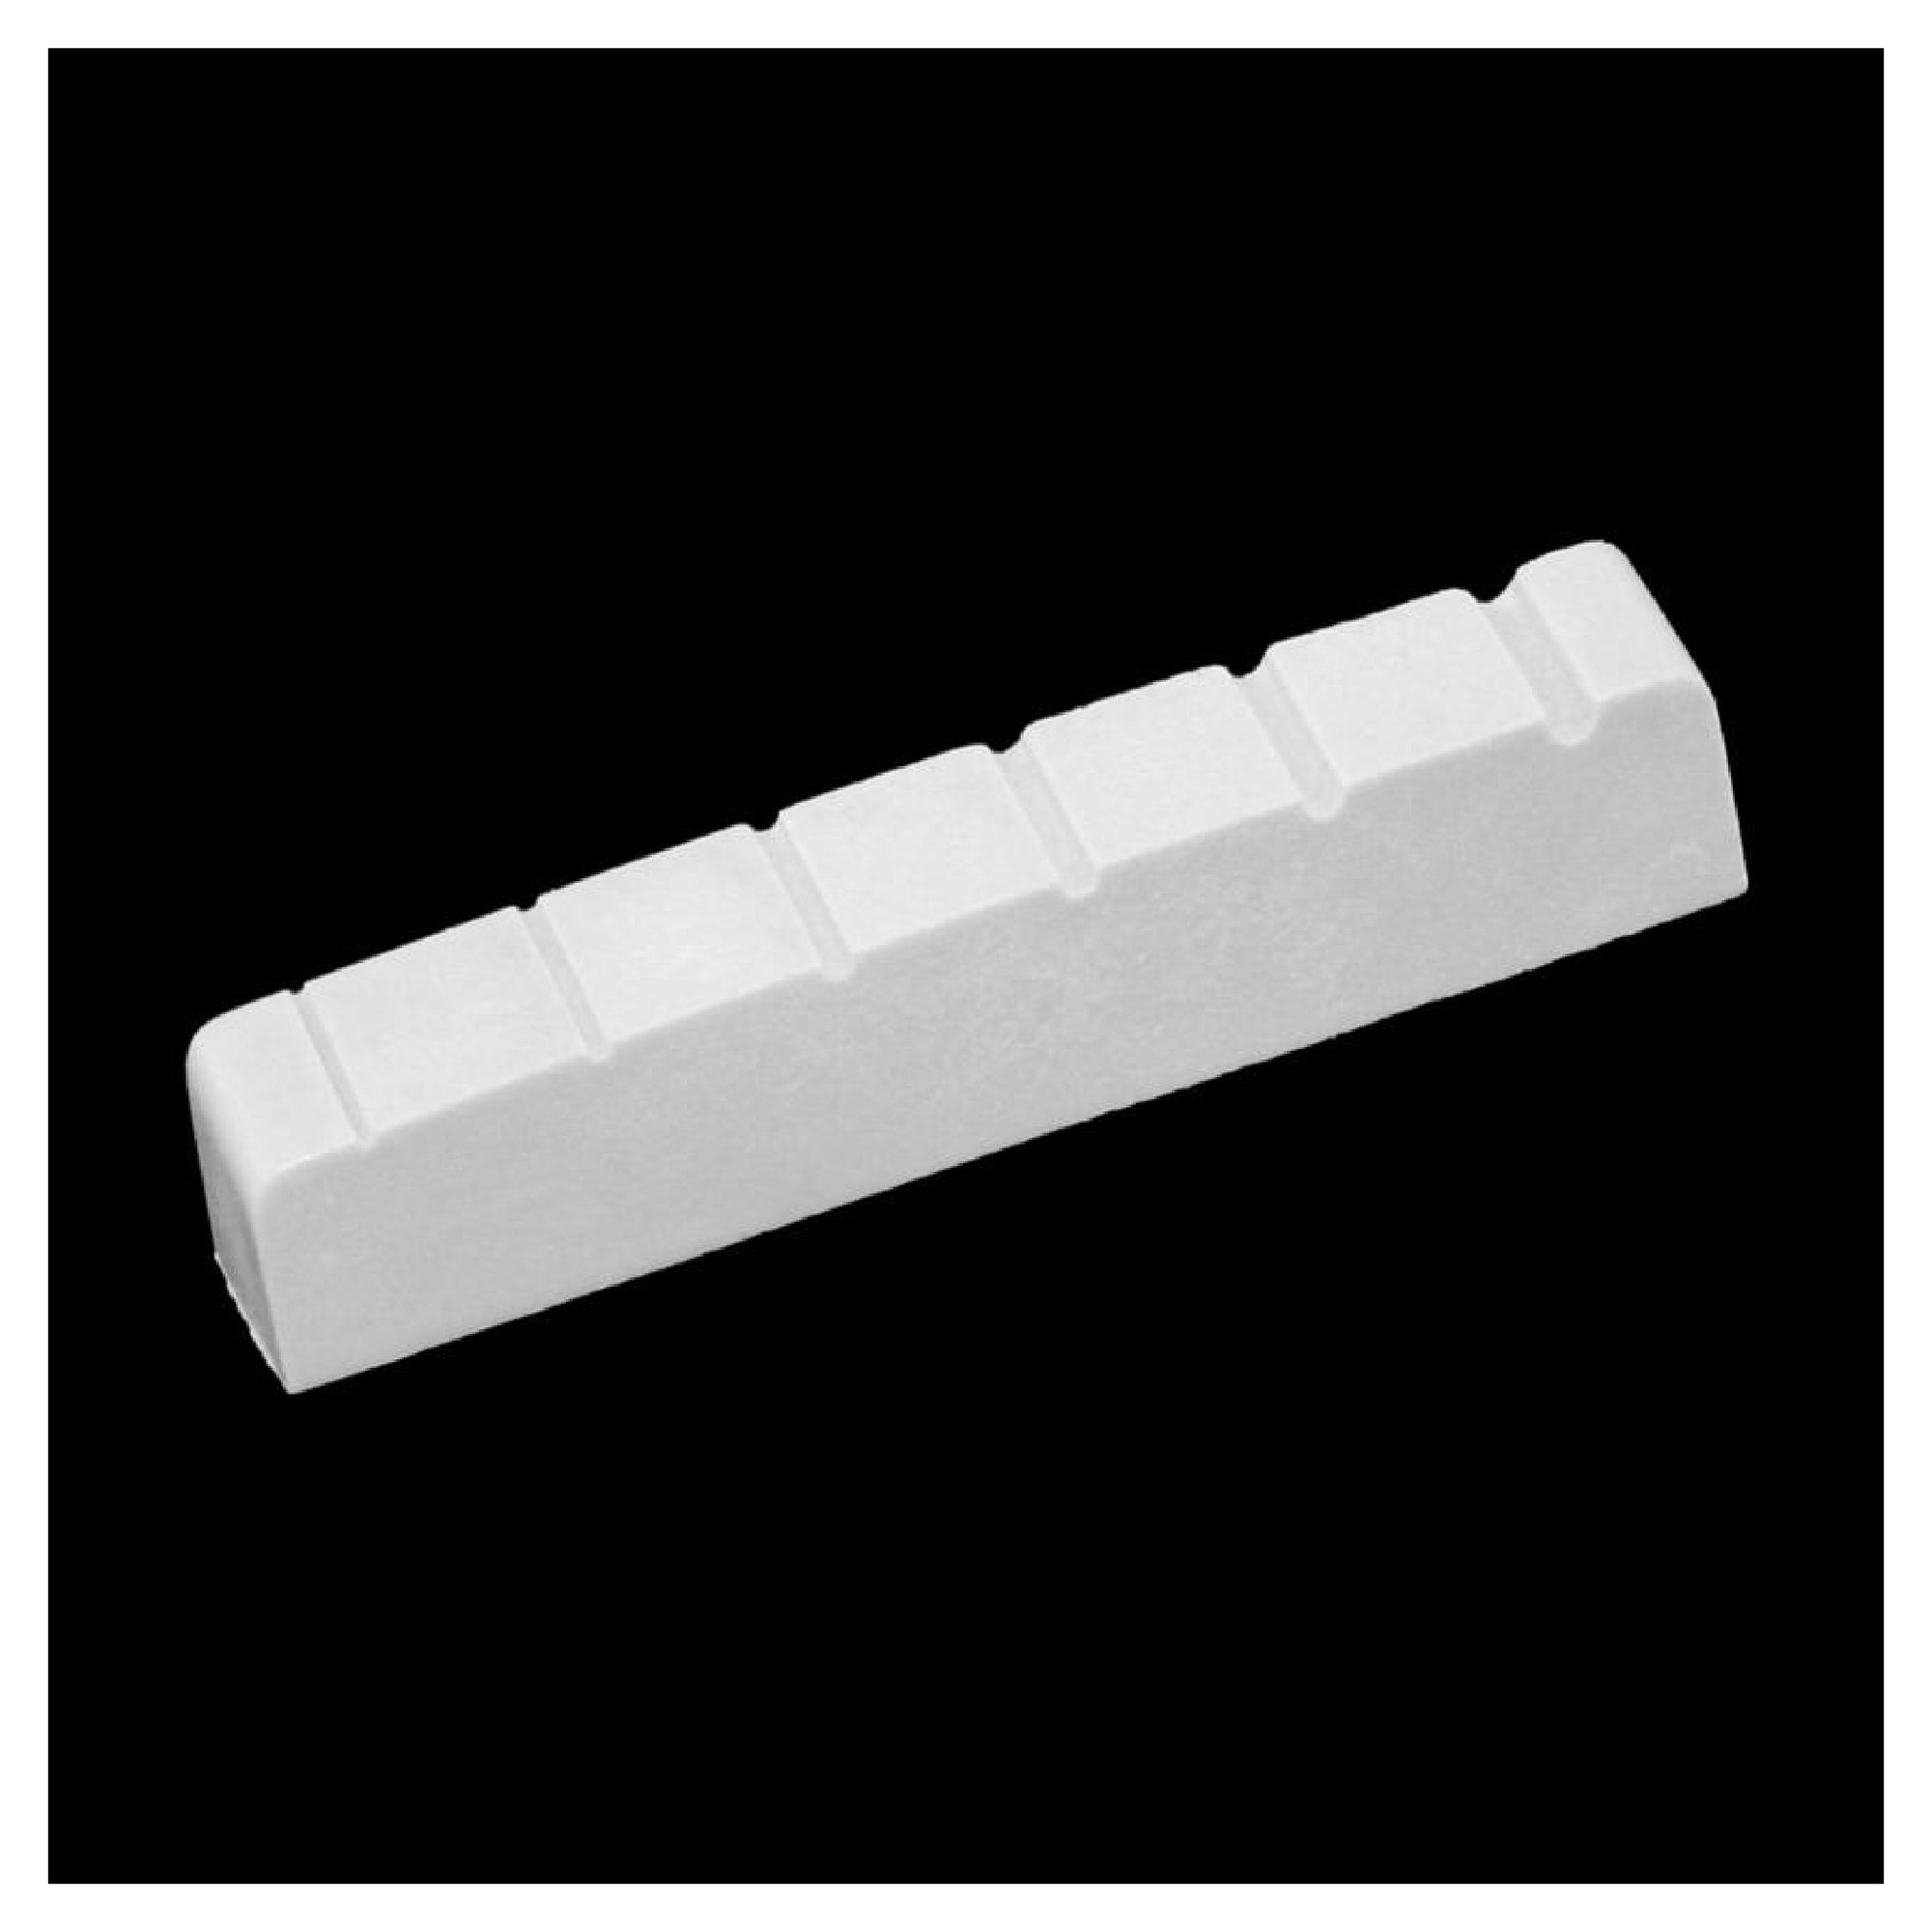 Allparts BN-0874-025 Plastic Nut - Slotted Each